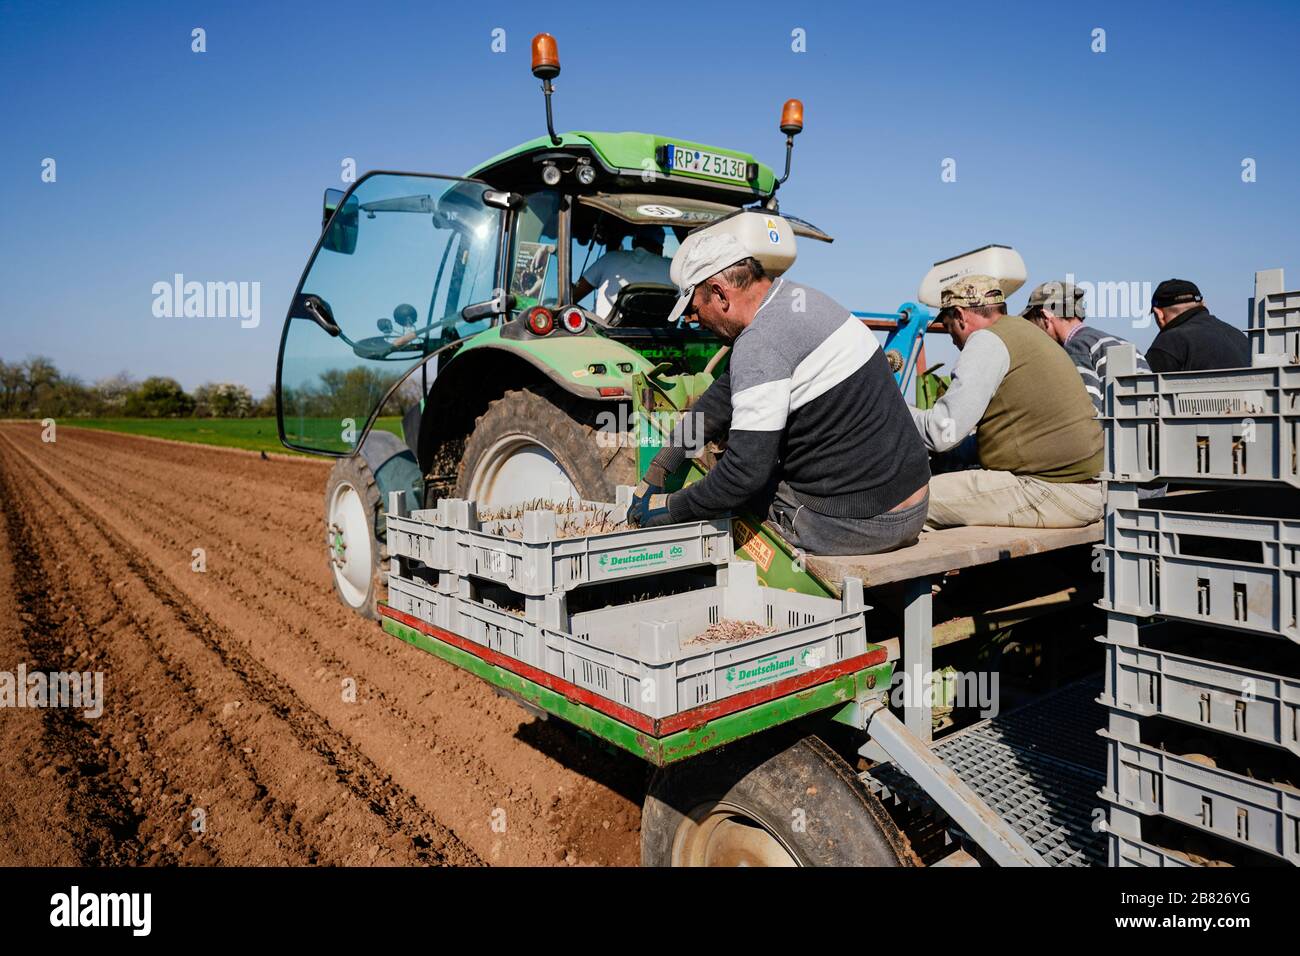 19 March 2020, Rhineland-Palatinate, Böhl-Iggelheim: Field workers on a tractor plant early potatoes of the Annabelle variety in a field. In the climatically favoured Vorderpfalz the planting of the first early potatoes of the season has begun. Photo: Uwe Anspach/dpa Stock Photo